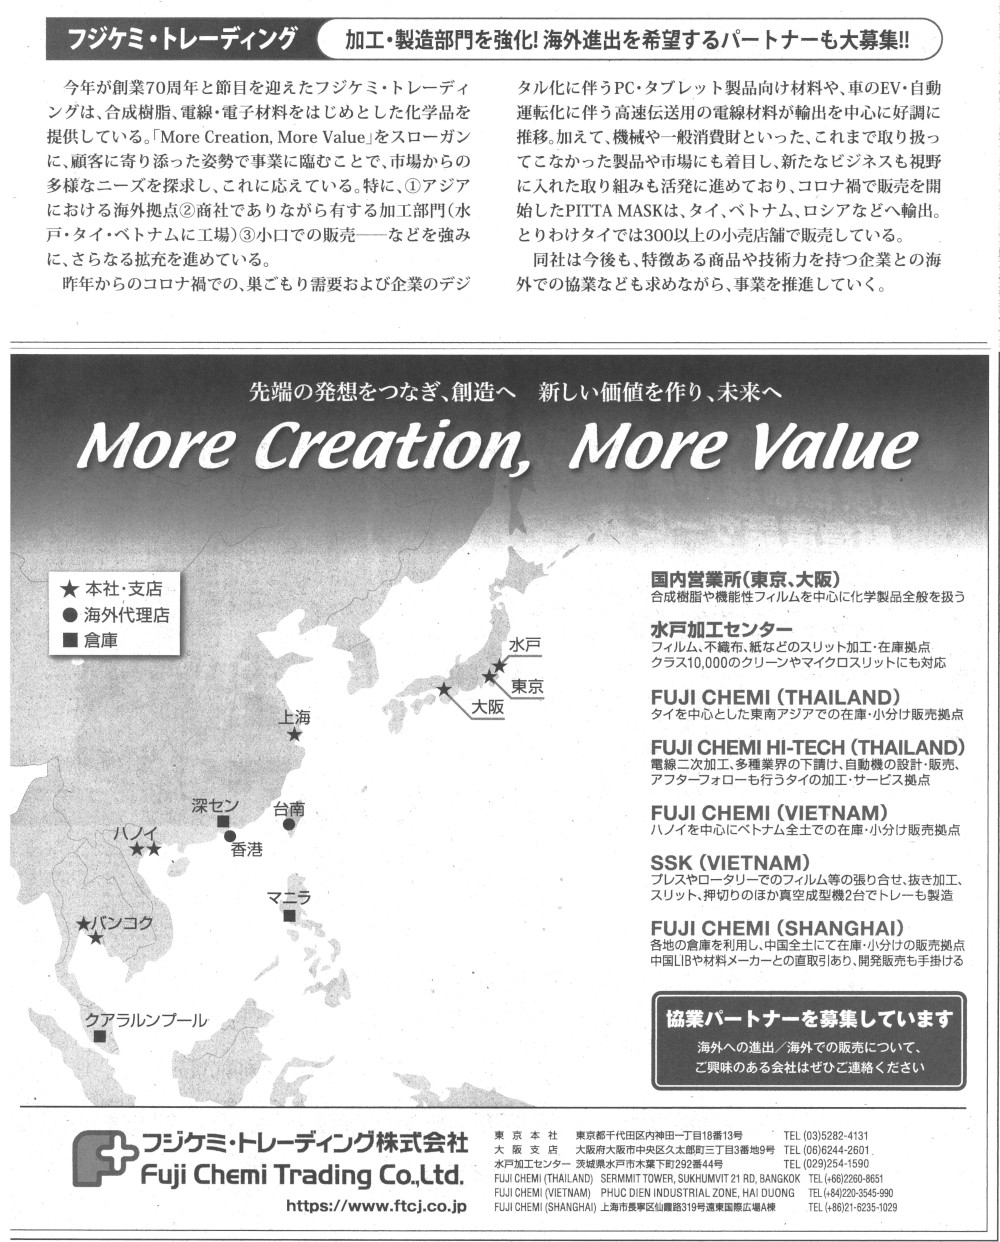 Nikkei Sangyo Shimbun, Special Feature on Japanese Chemistry, Chemical Trading Company / Logistics Planning